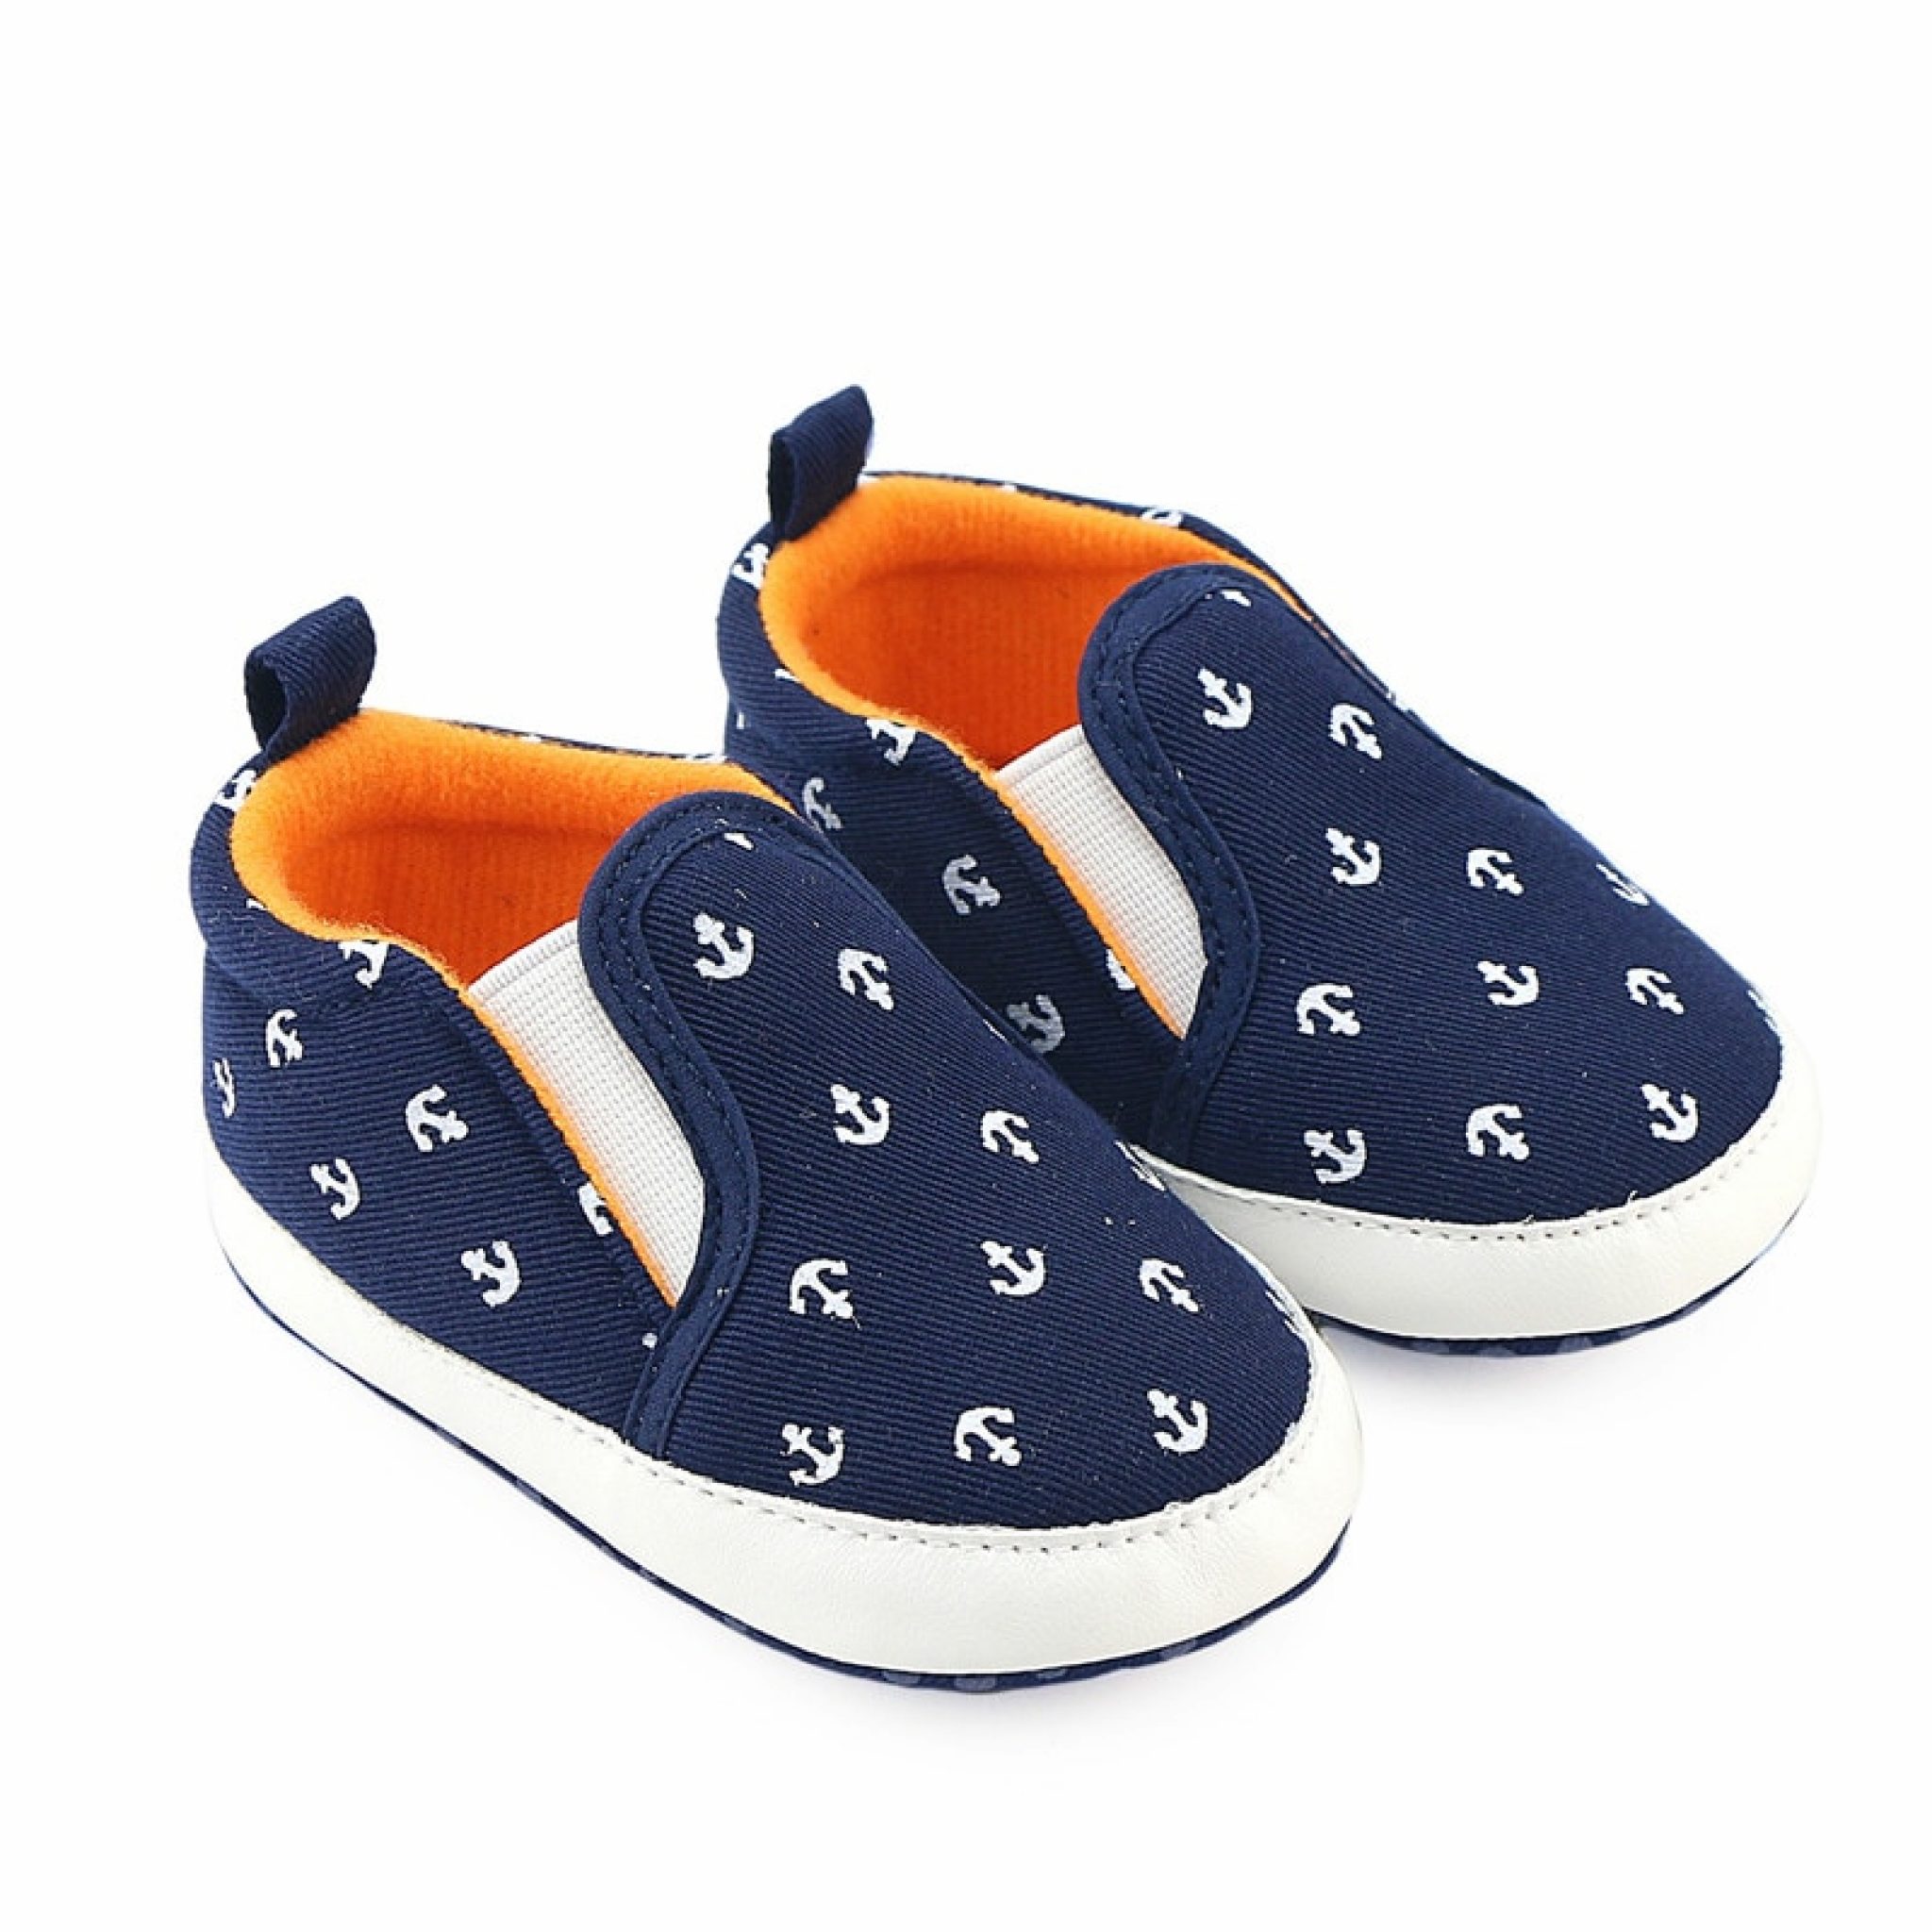 Navy Blue Casual Infant Baby Shoes Sneaker - Parvaty.com